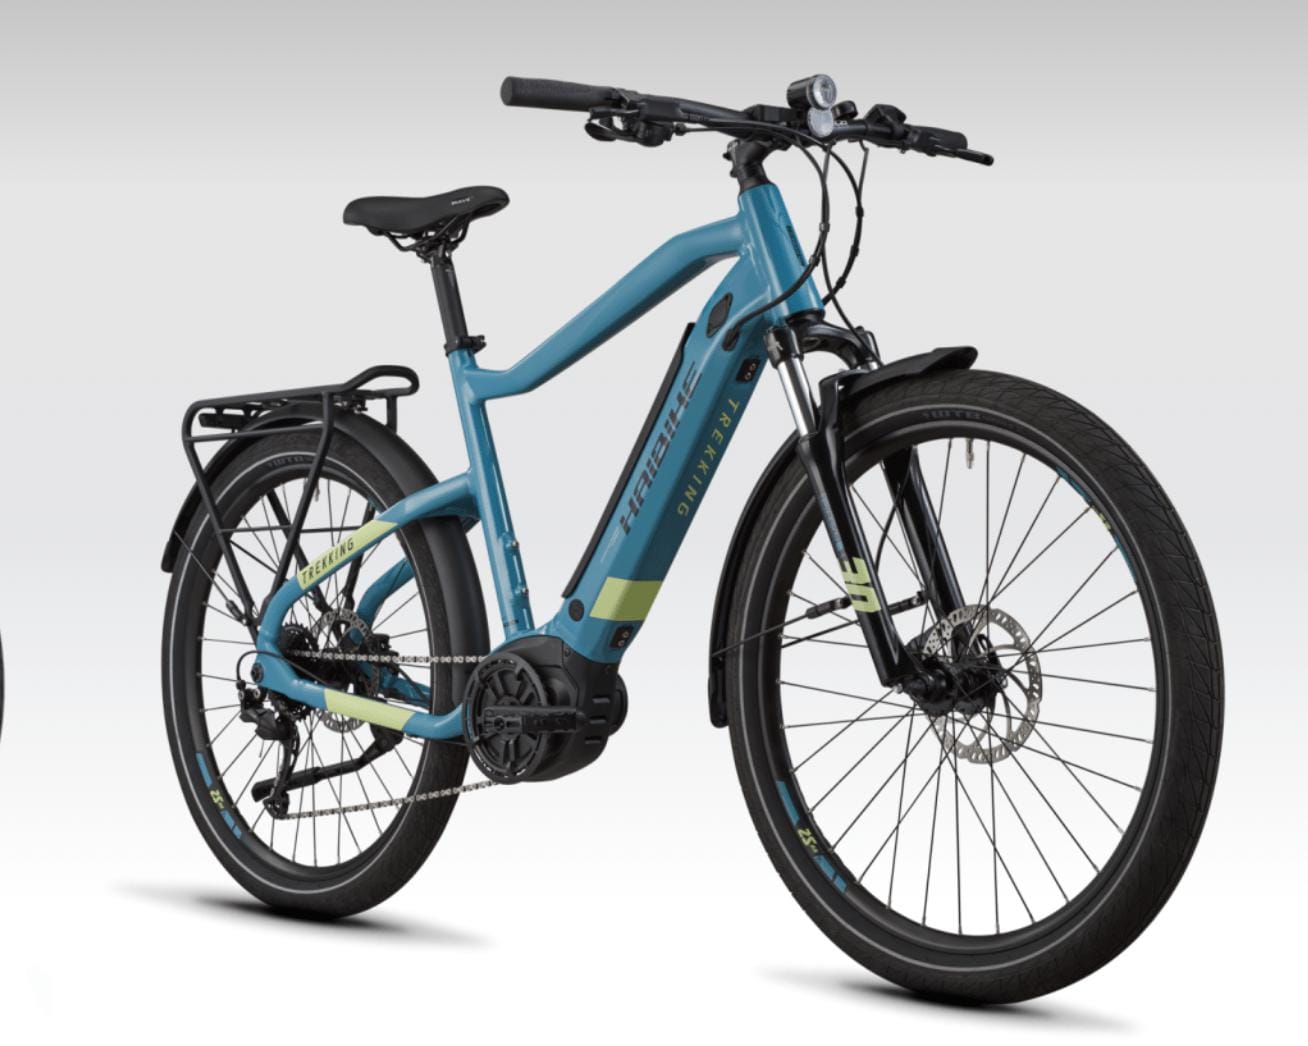 Haibike Trekking 5 For Sale  Fly Rides USA – Fly Rides USA